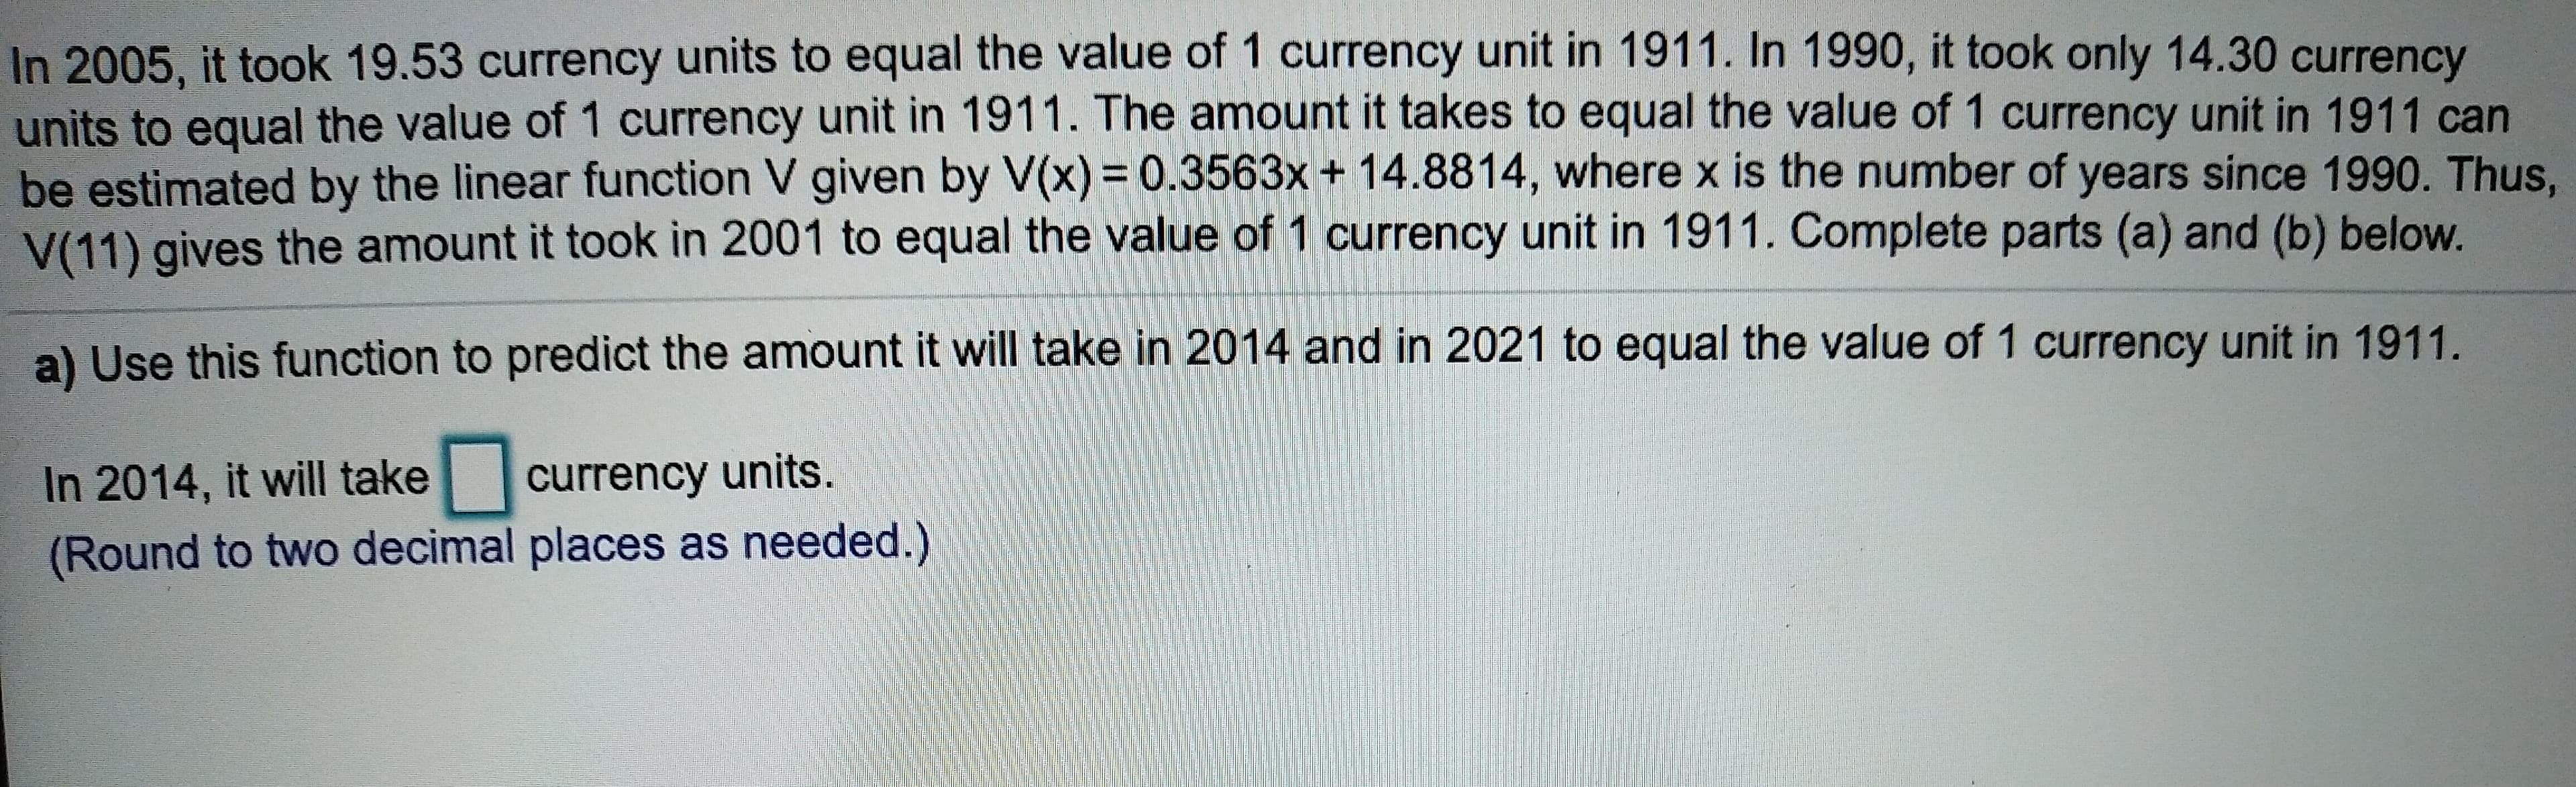 In 2005, it took 19.53 currency units to equal the value of 1 currency unit in 1911. In 1990, it took only 14.30 currency
units to equal the value of 1 currency unit in 1911. The amount it takes to equal the value of 1 currency unit in 1911 can
be estimated by the linear function V given by V(x) 0.3563x+ 14.8814, where x is the number of years since 1990. Thus,
V(11) gives the amount it took in 2001 to equal the value of 1 currency unit in 1911. Complete parts (a) and (b) below.
of 1 currency unit in 1911.
a) Use this function to predict the amount it will take in 2014 and in 2021 to equal the value
currency units.
In 2014, it will take
(Round to two decimal places as needed.)
